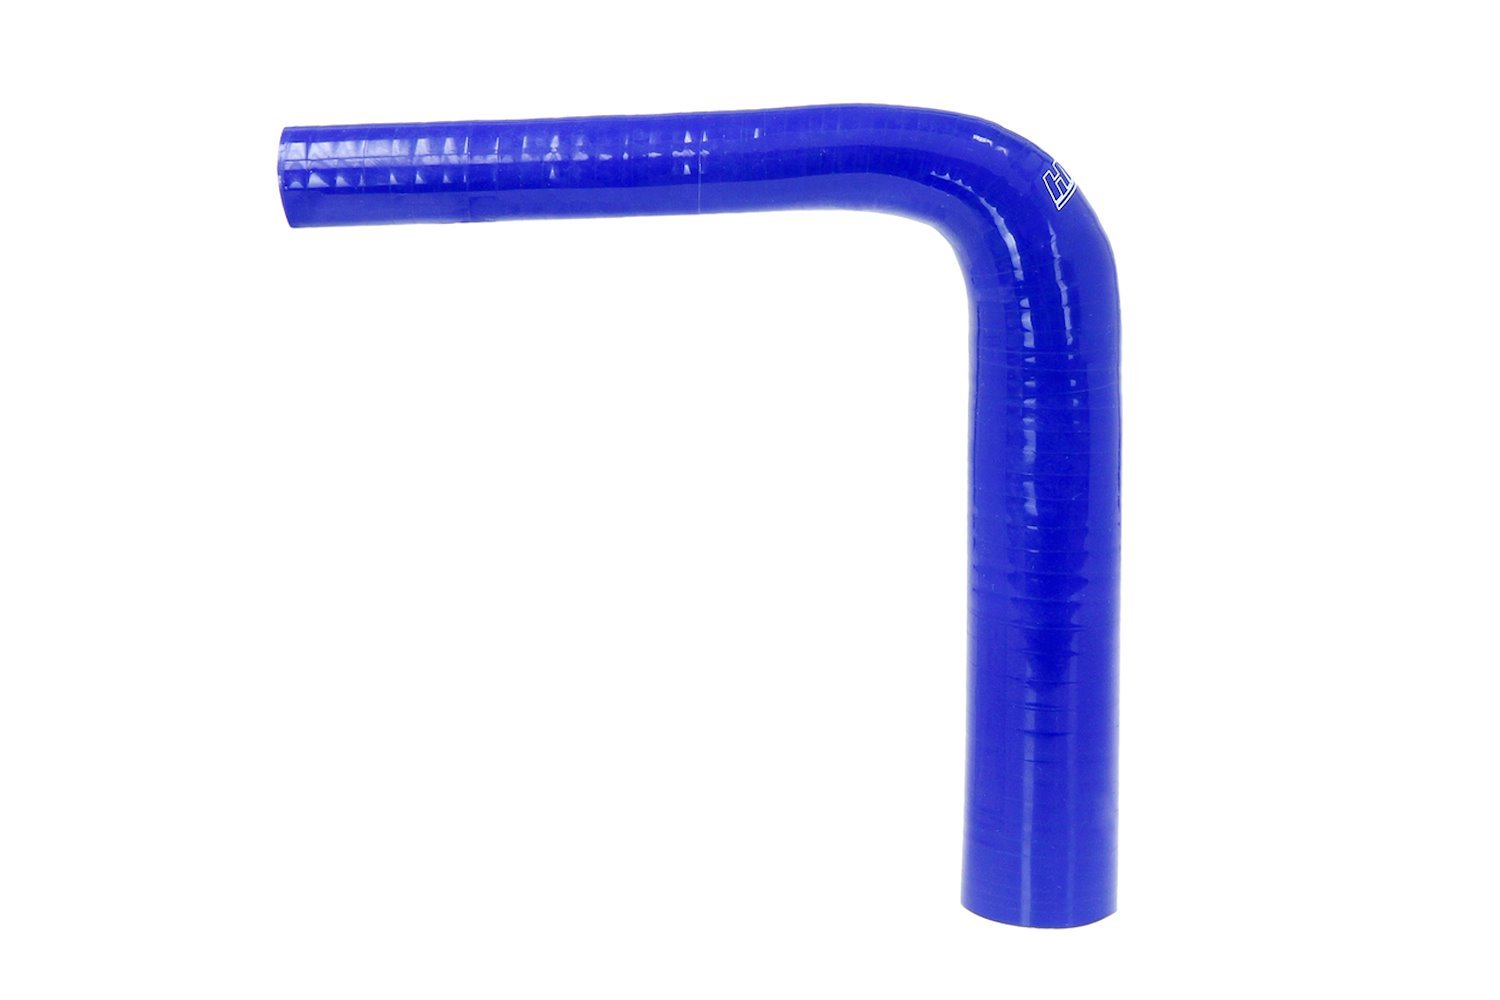 HTSER90-075-125-BLUE Silicone 90-Degree Elbow Hose, High-Temp 4-Ply Reinforced, 3/4 in. - 1-1/4 in. ID, Blue